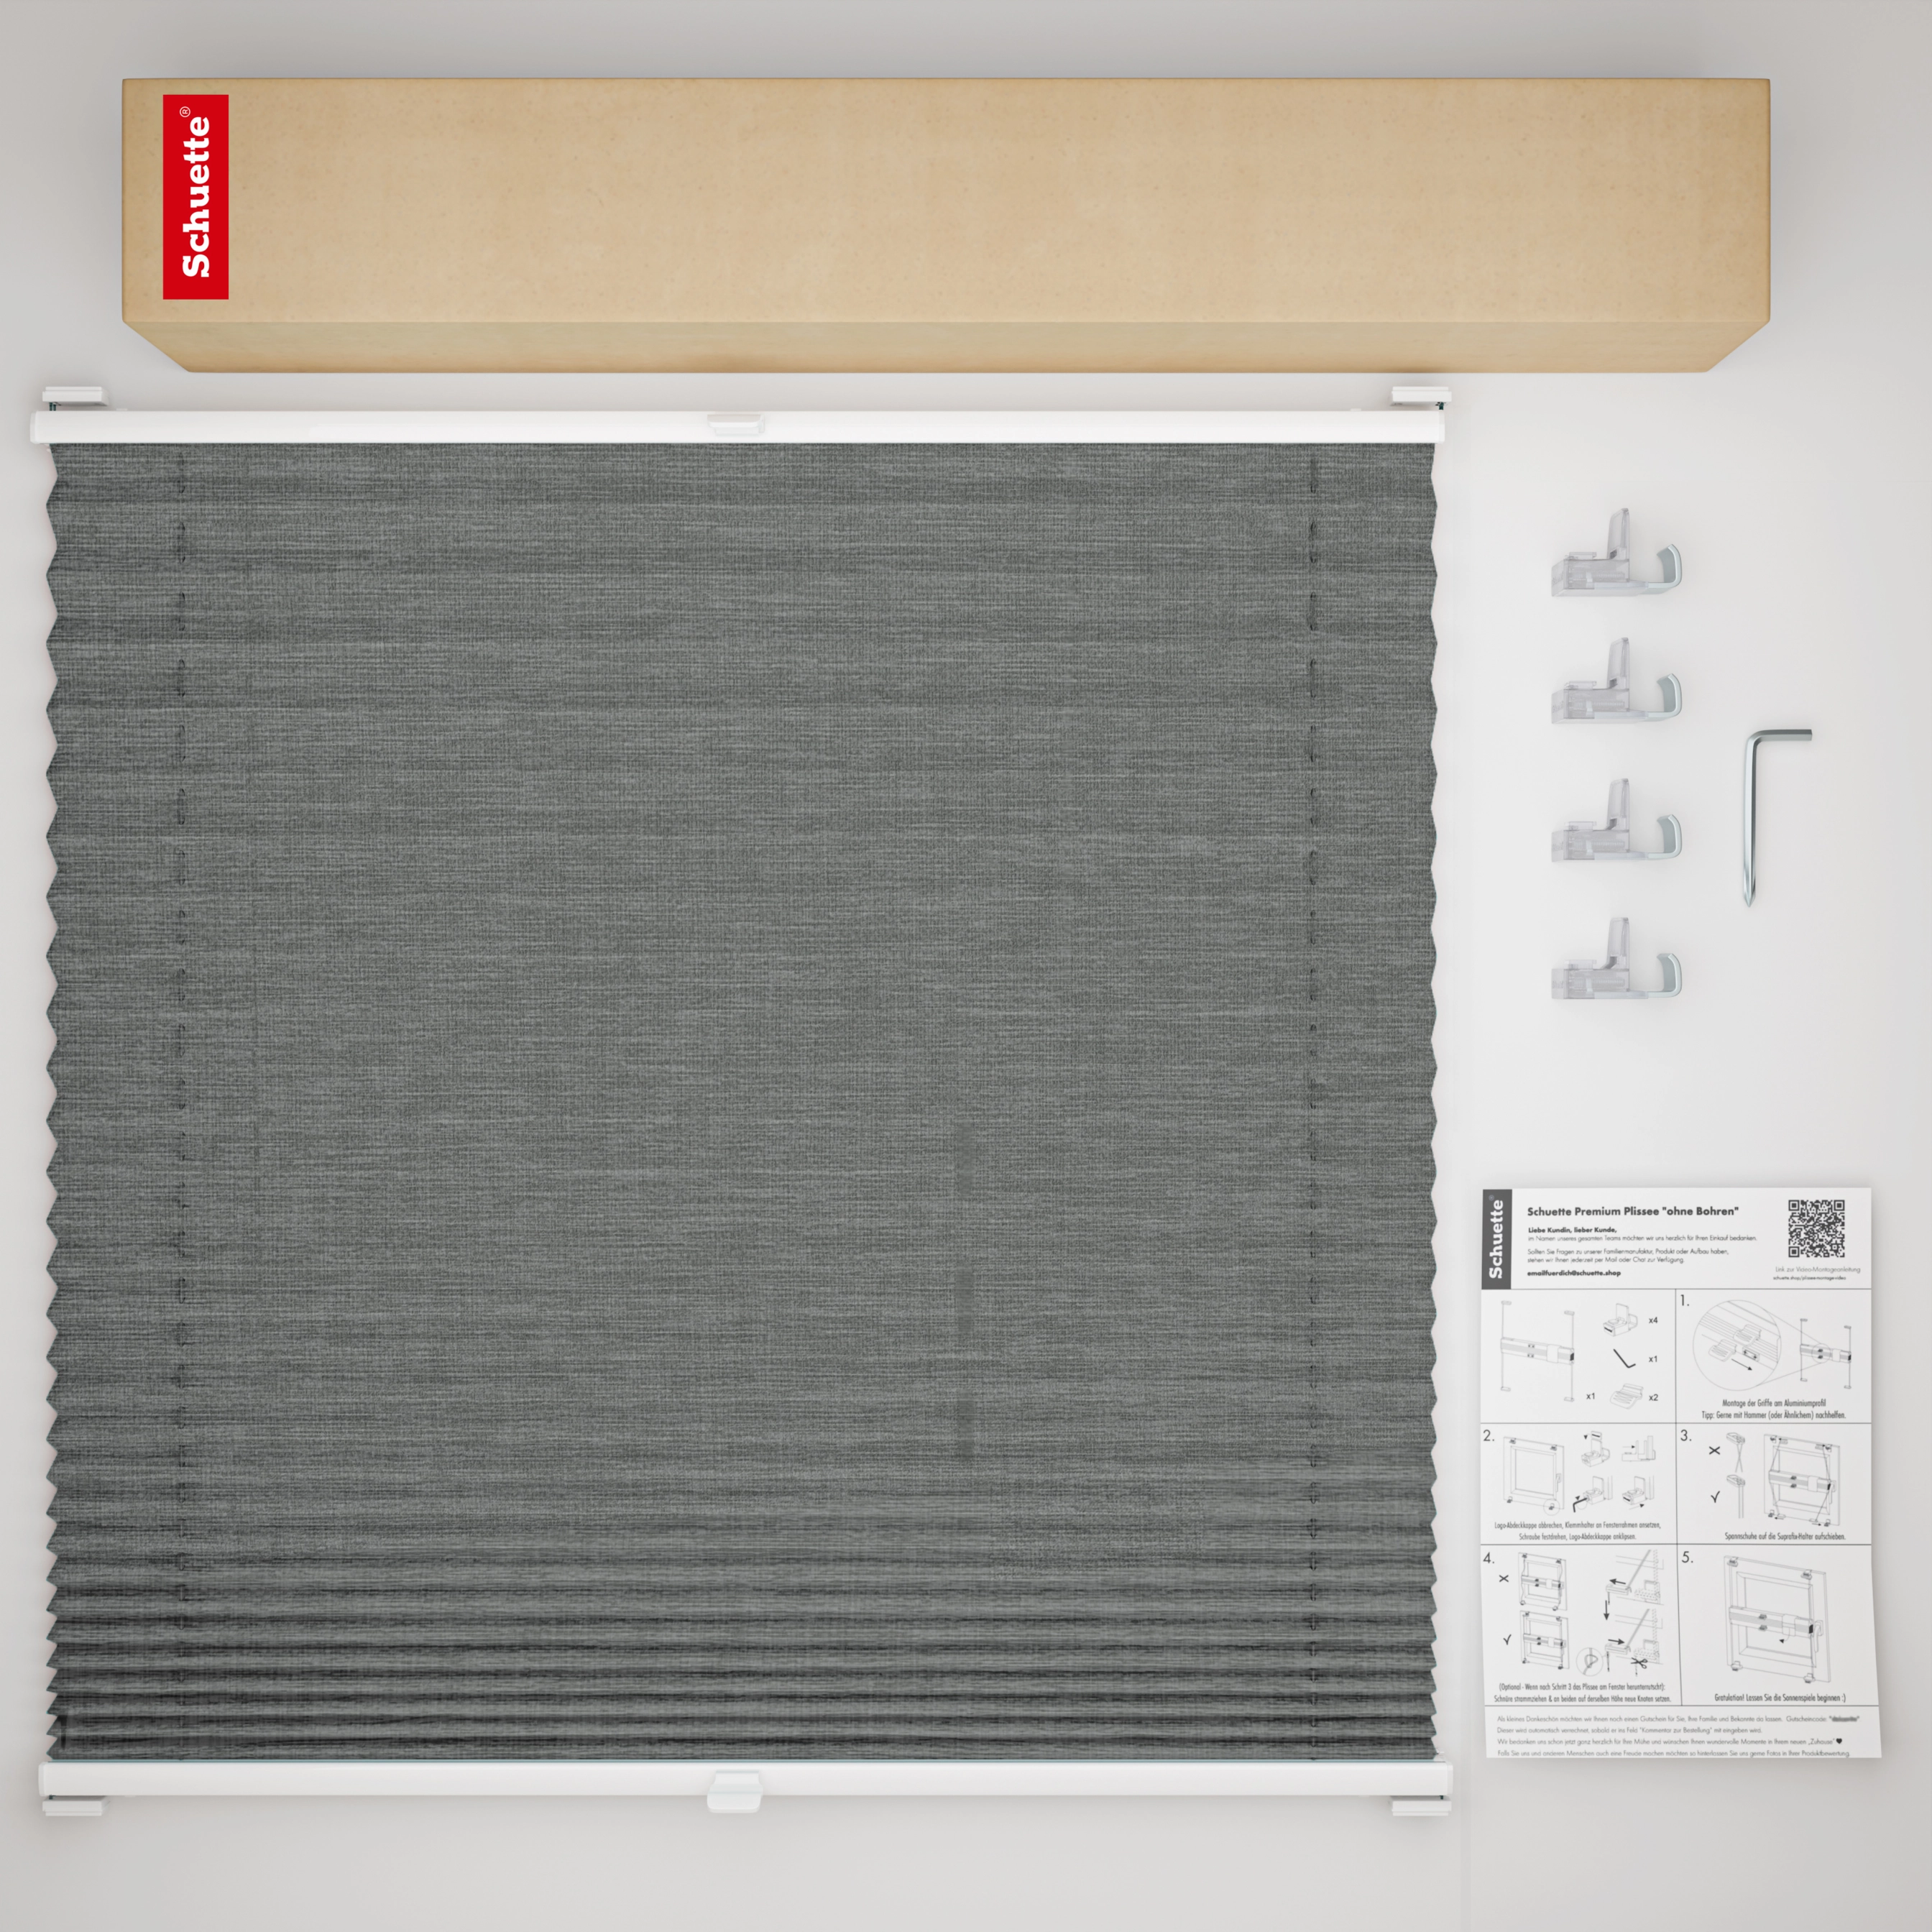 Schuette® Pleated Blind Made to Measure without Drilling • Suprafix Clamp holder “Incognito" Standard” • Melange Collection: Black Pearl (Black) • Profile Colour: White